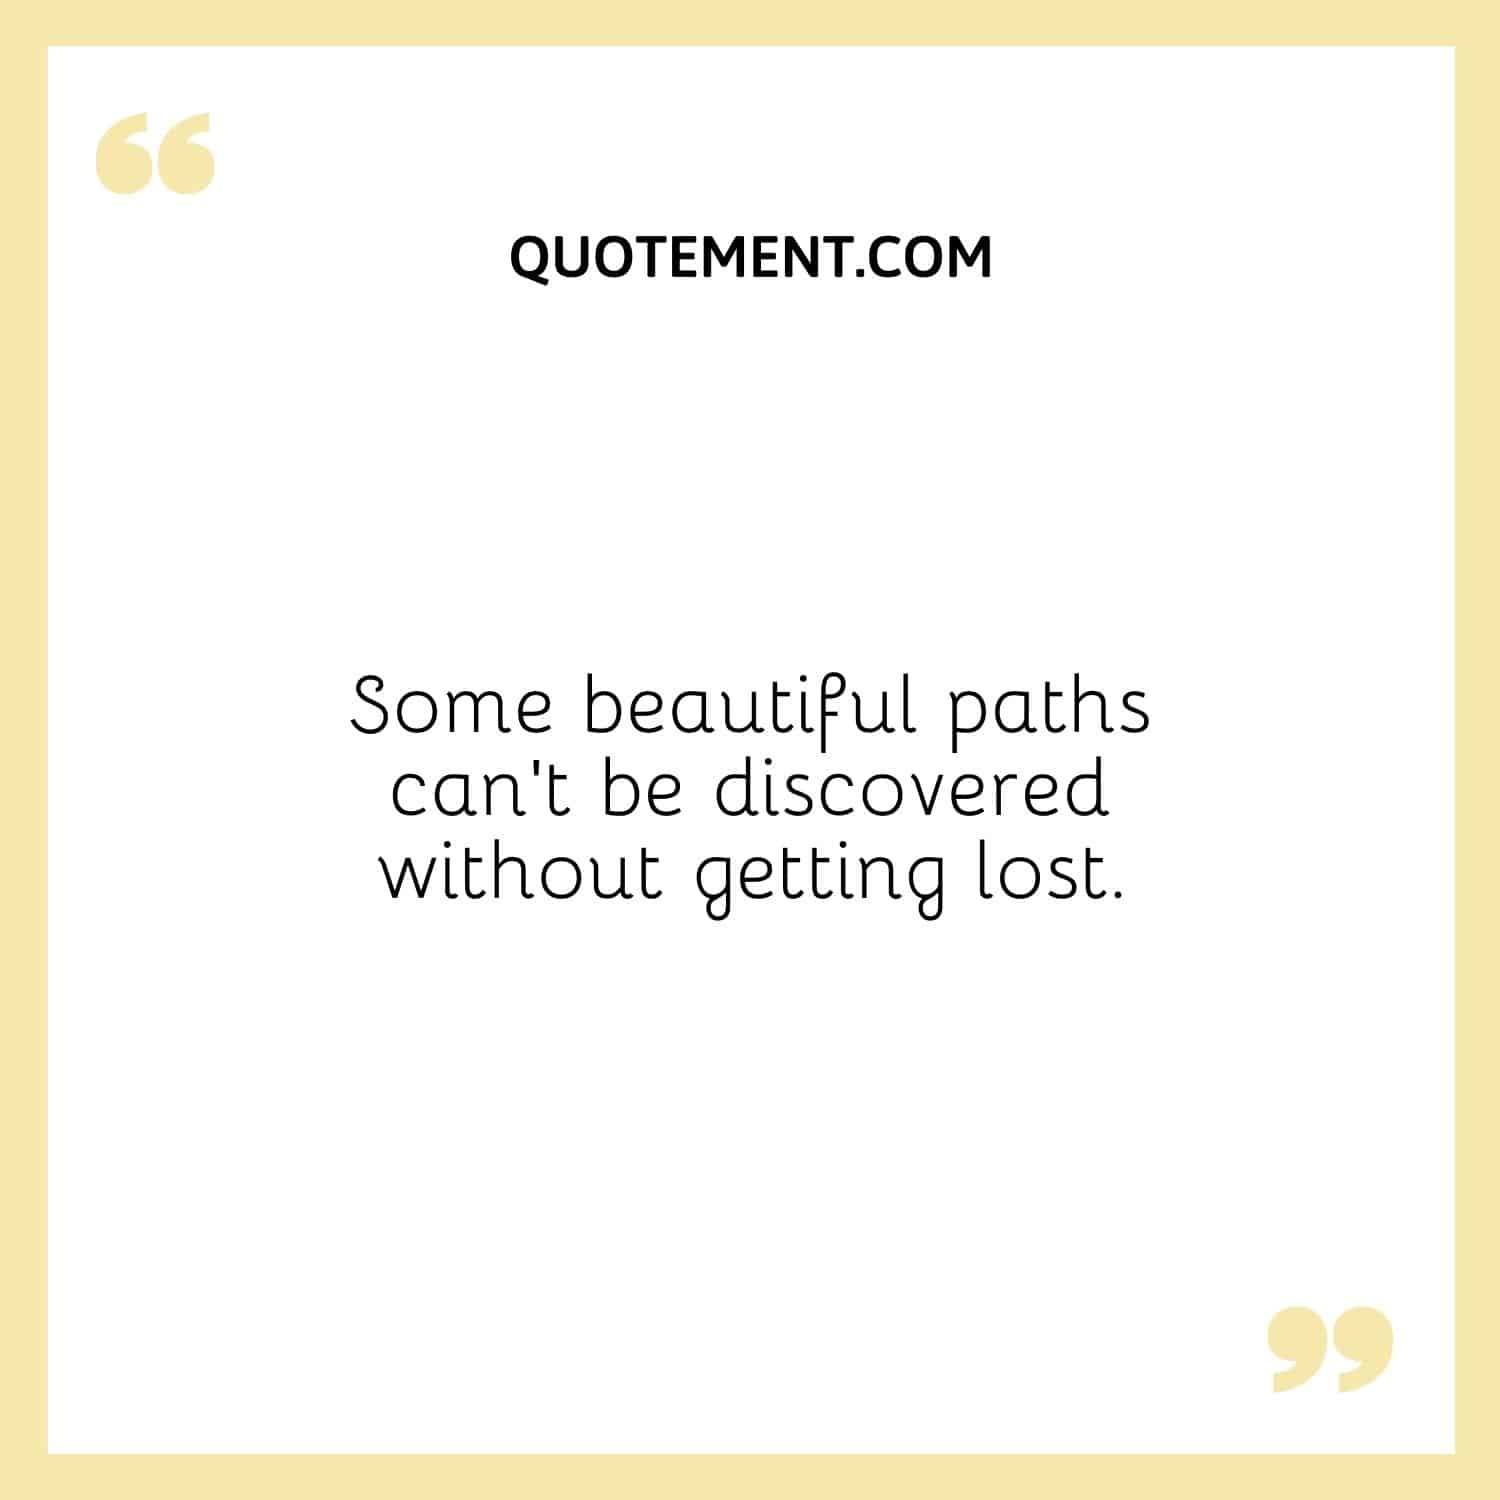 Some beautiful paths can’t be discovered without getting lost